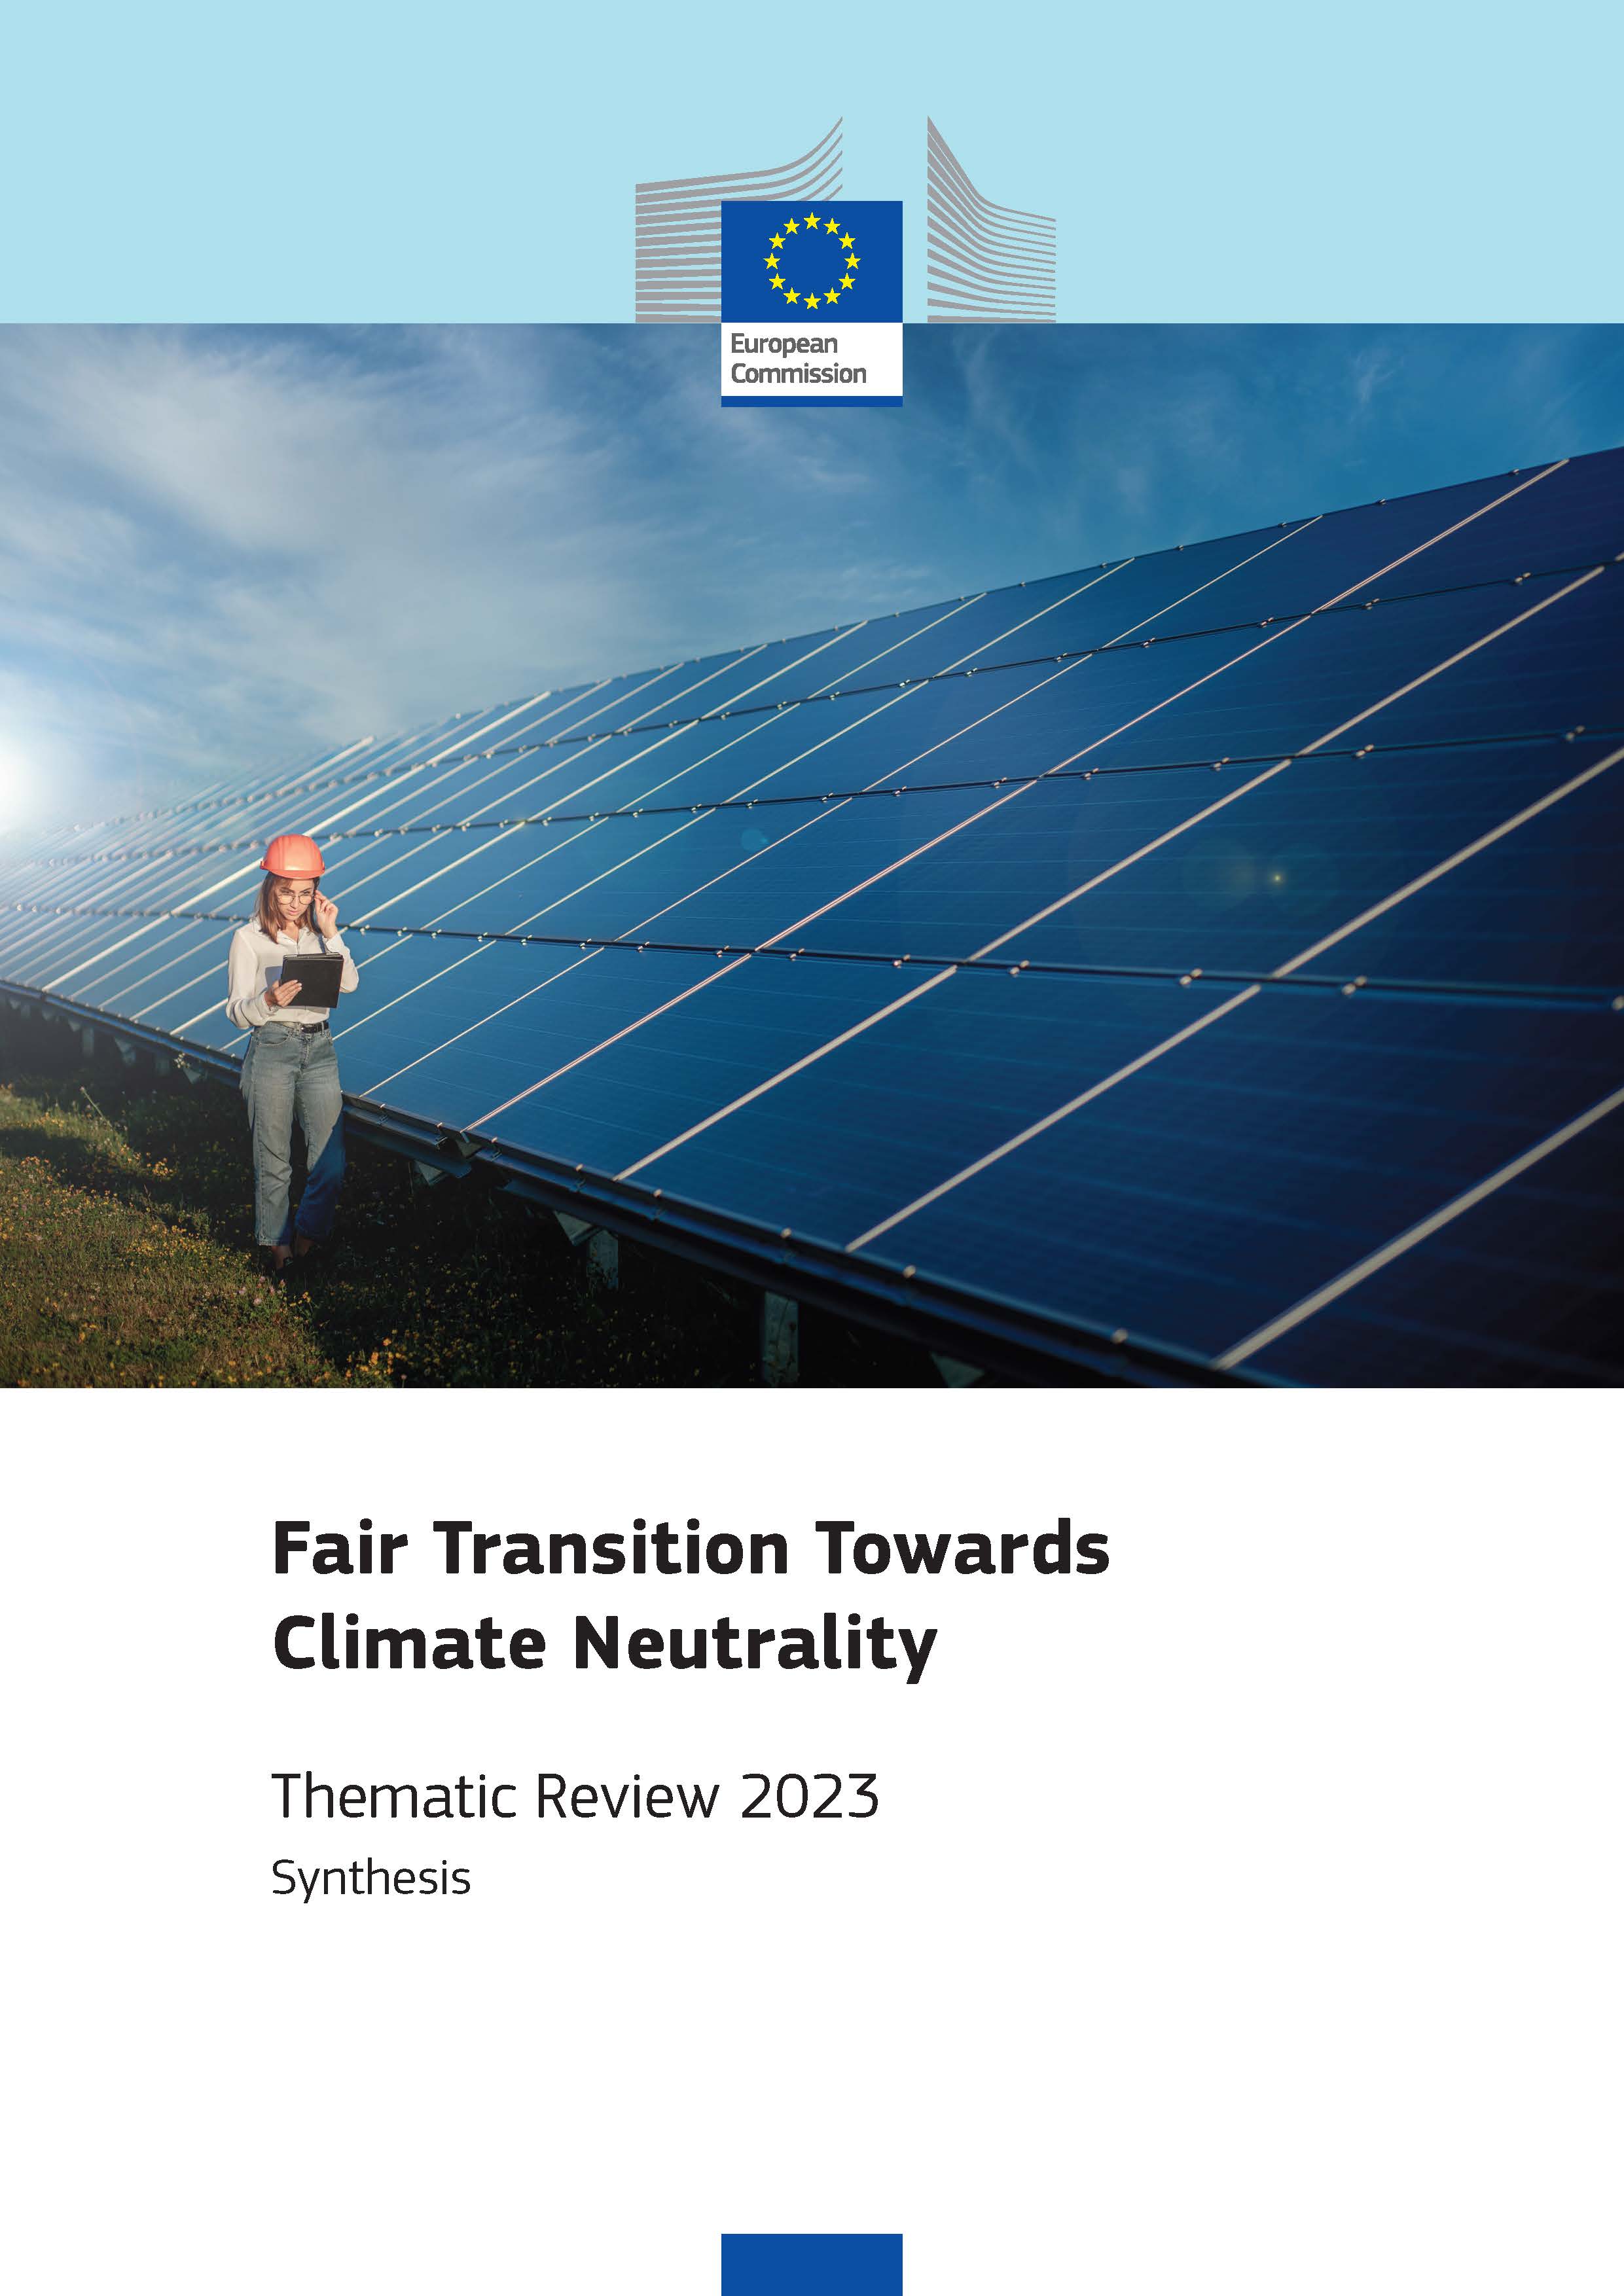 CELSI team contributed to the newly published Thematic Review on Fair Transition Towards Climate Neutrality